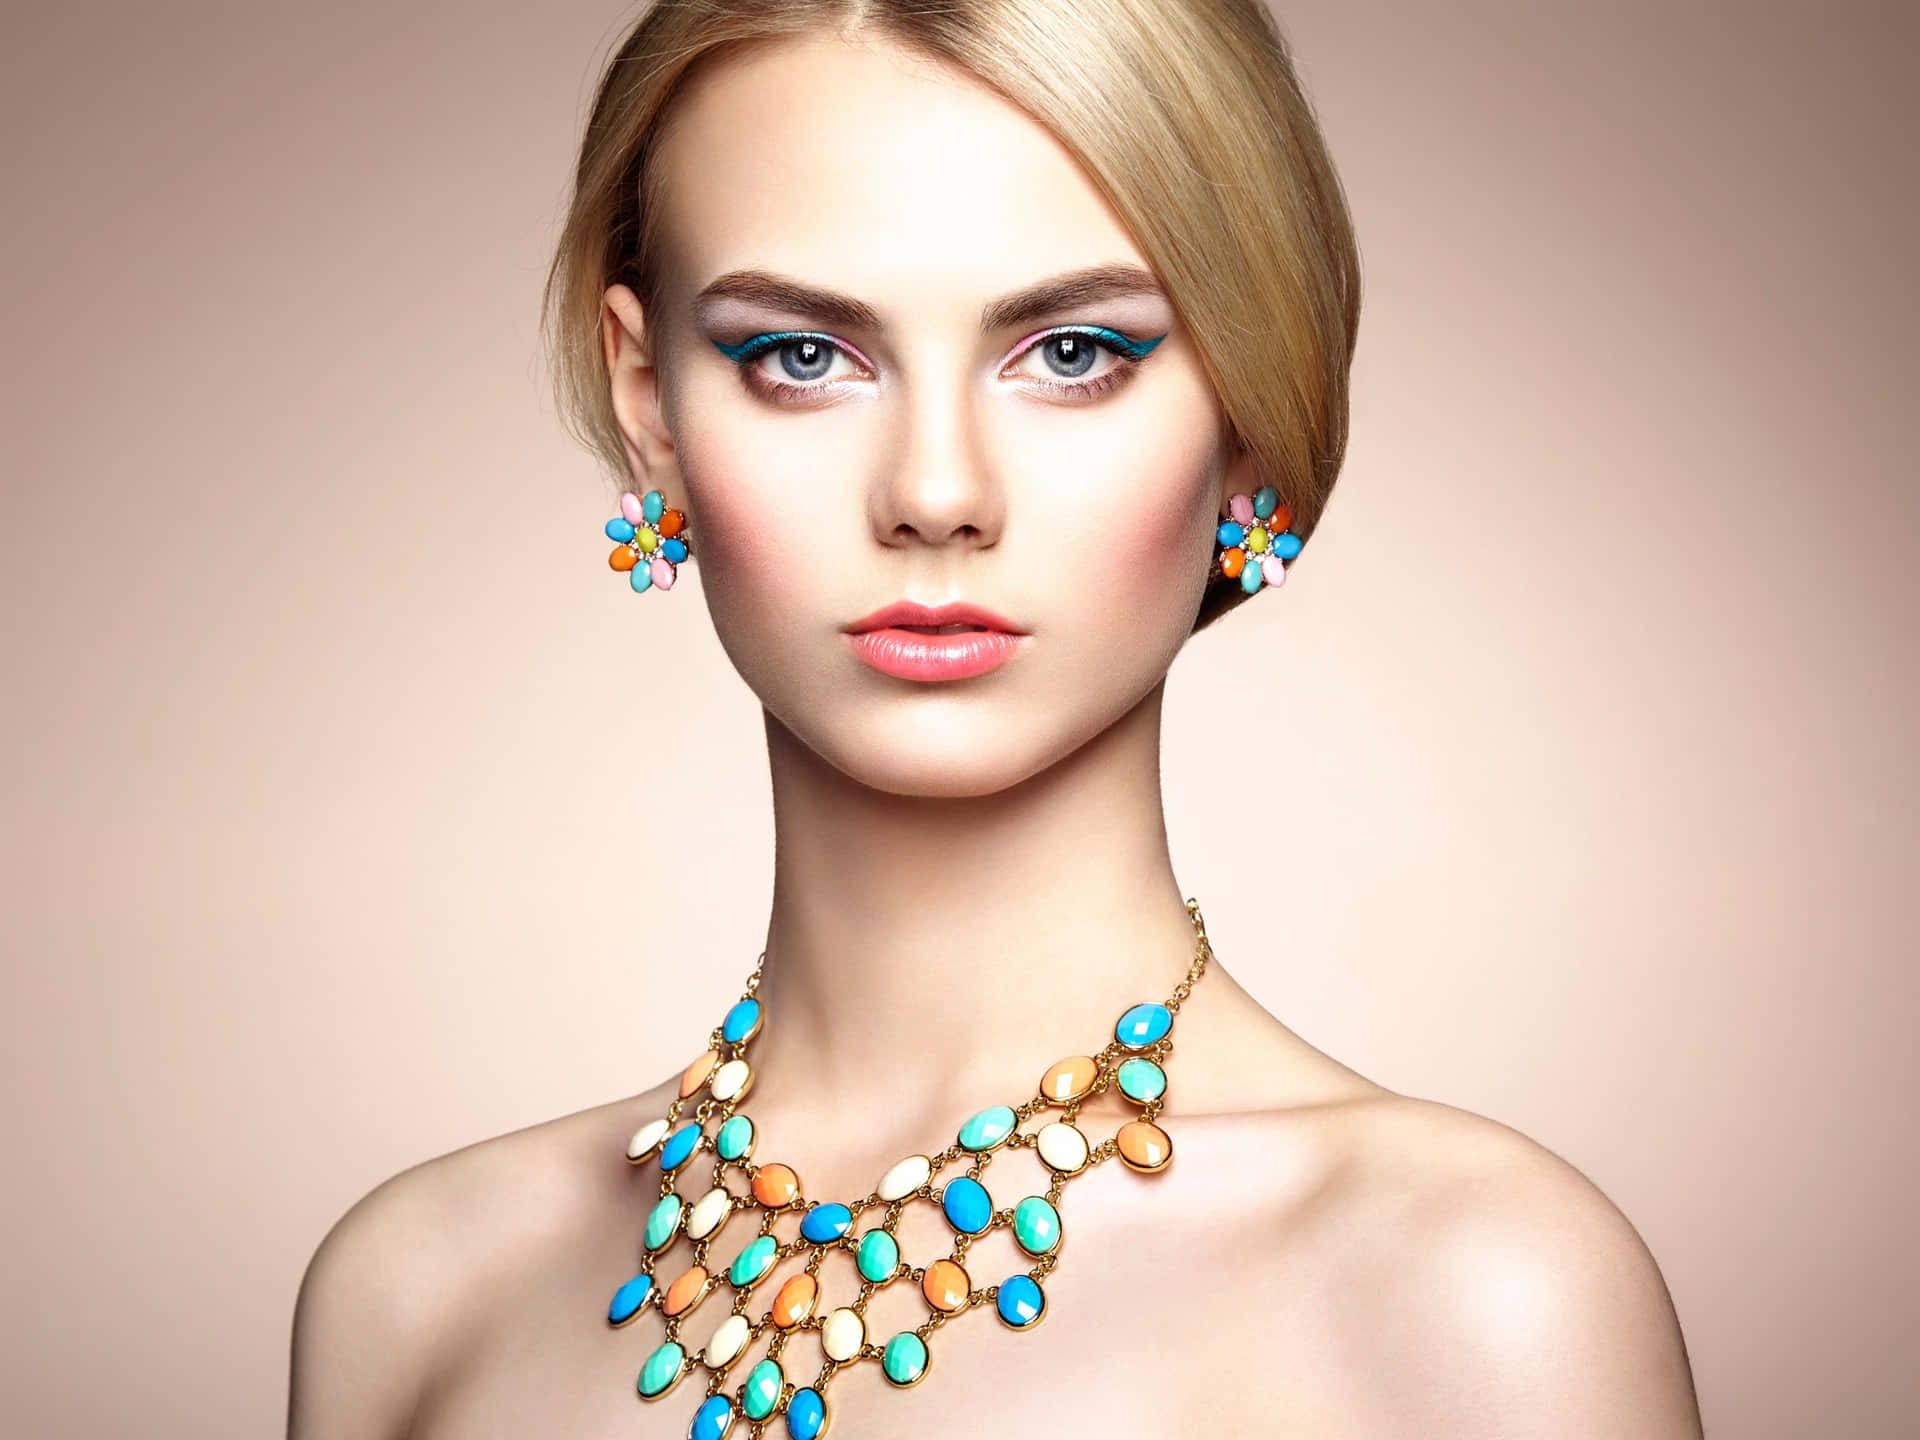 Accessorize With Elegant And Colorful Earrings